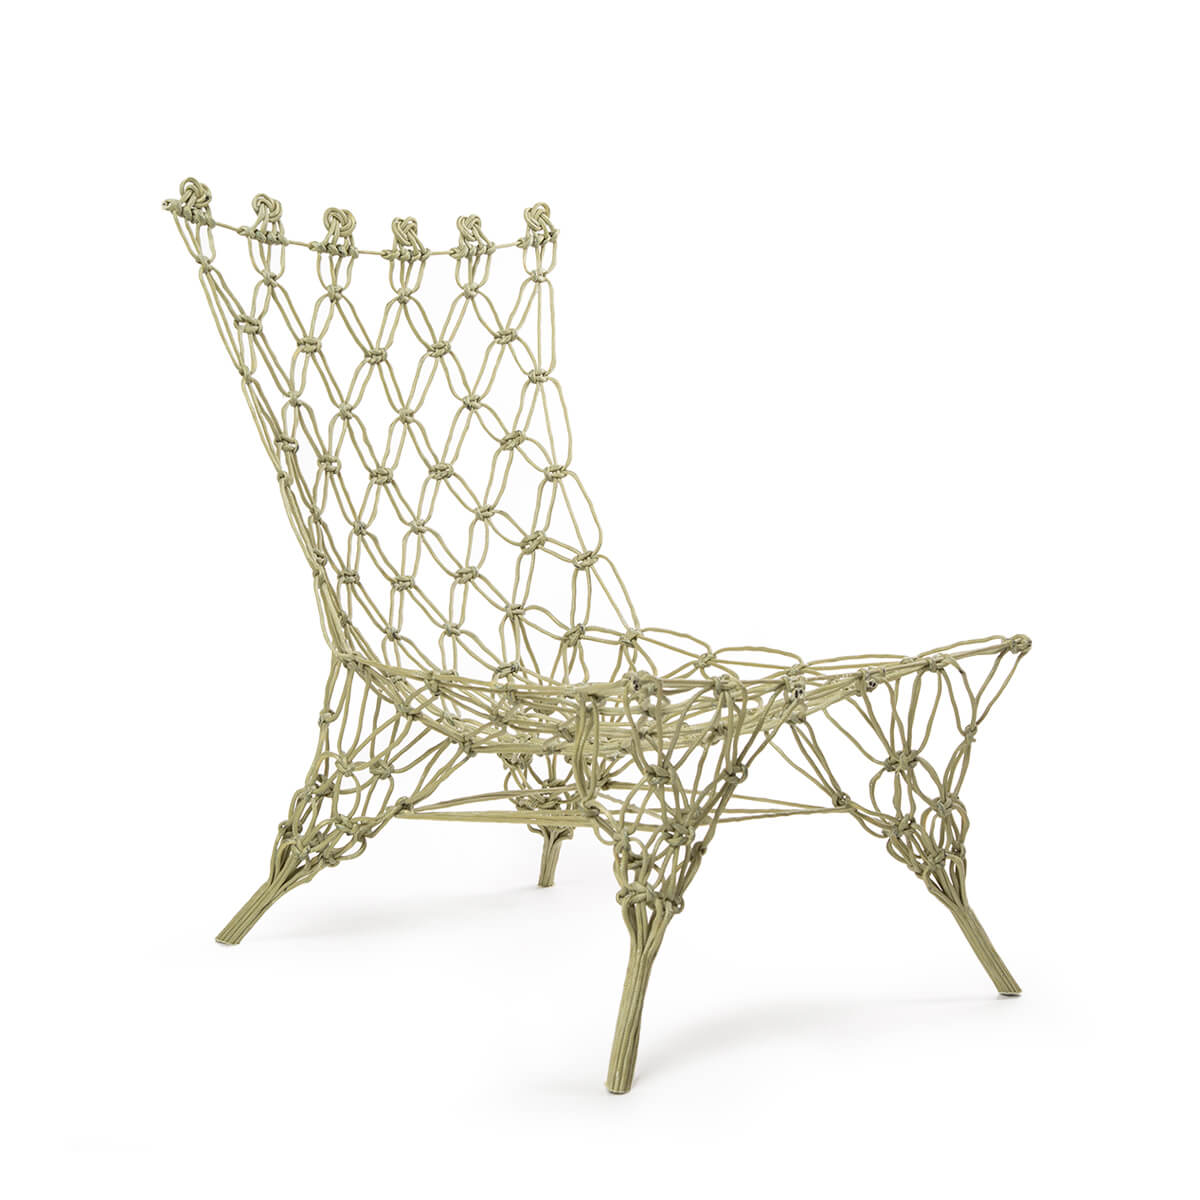 Knotted Lounge Chair  Designed by Marcel Wanders